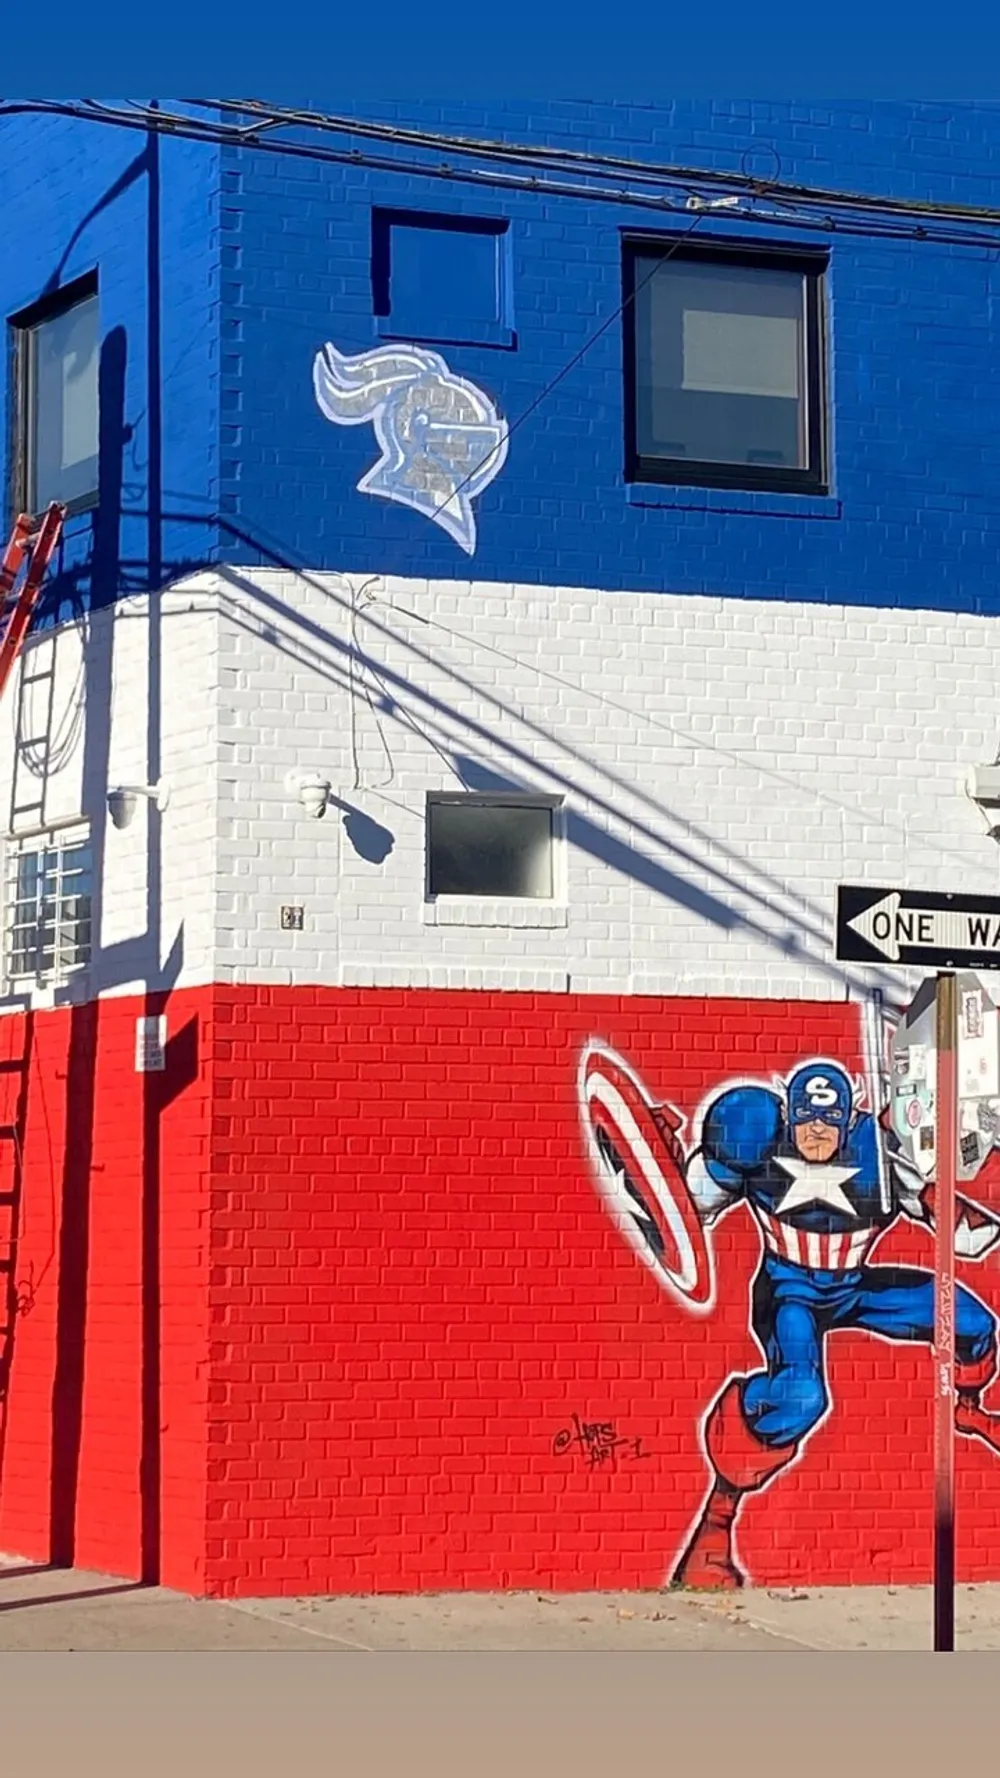 The image shows a vibrant street mural of a superhero character resembling Captain America on a red and blue painted building with a one-way street sign visible in the corner